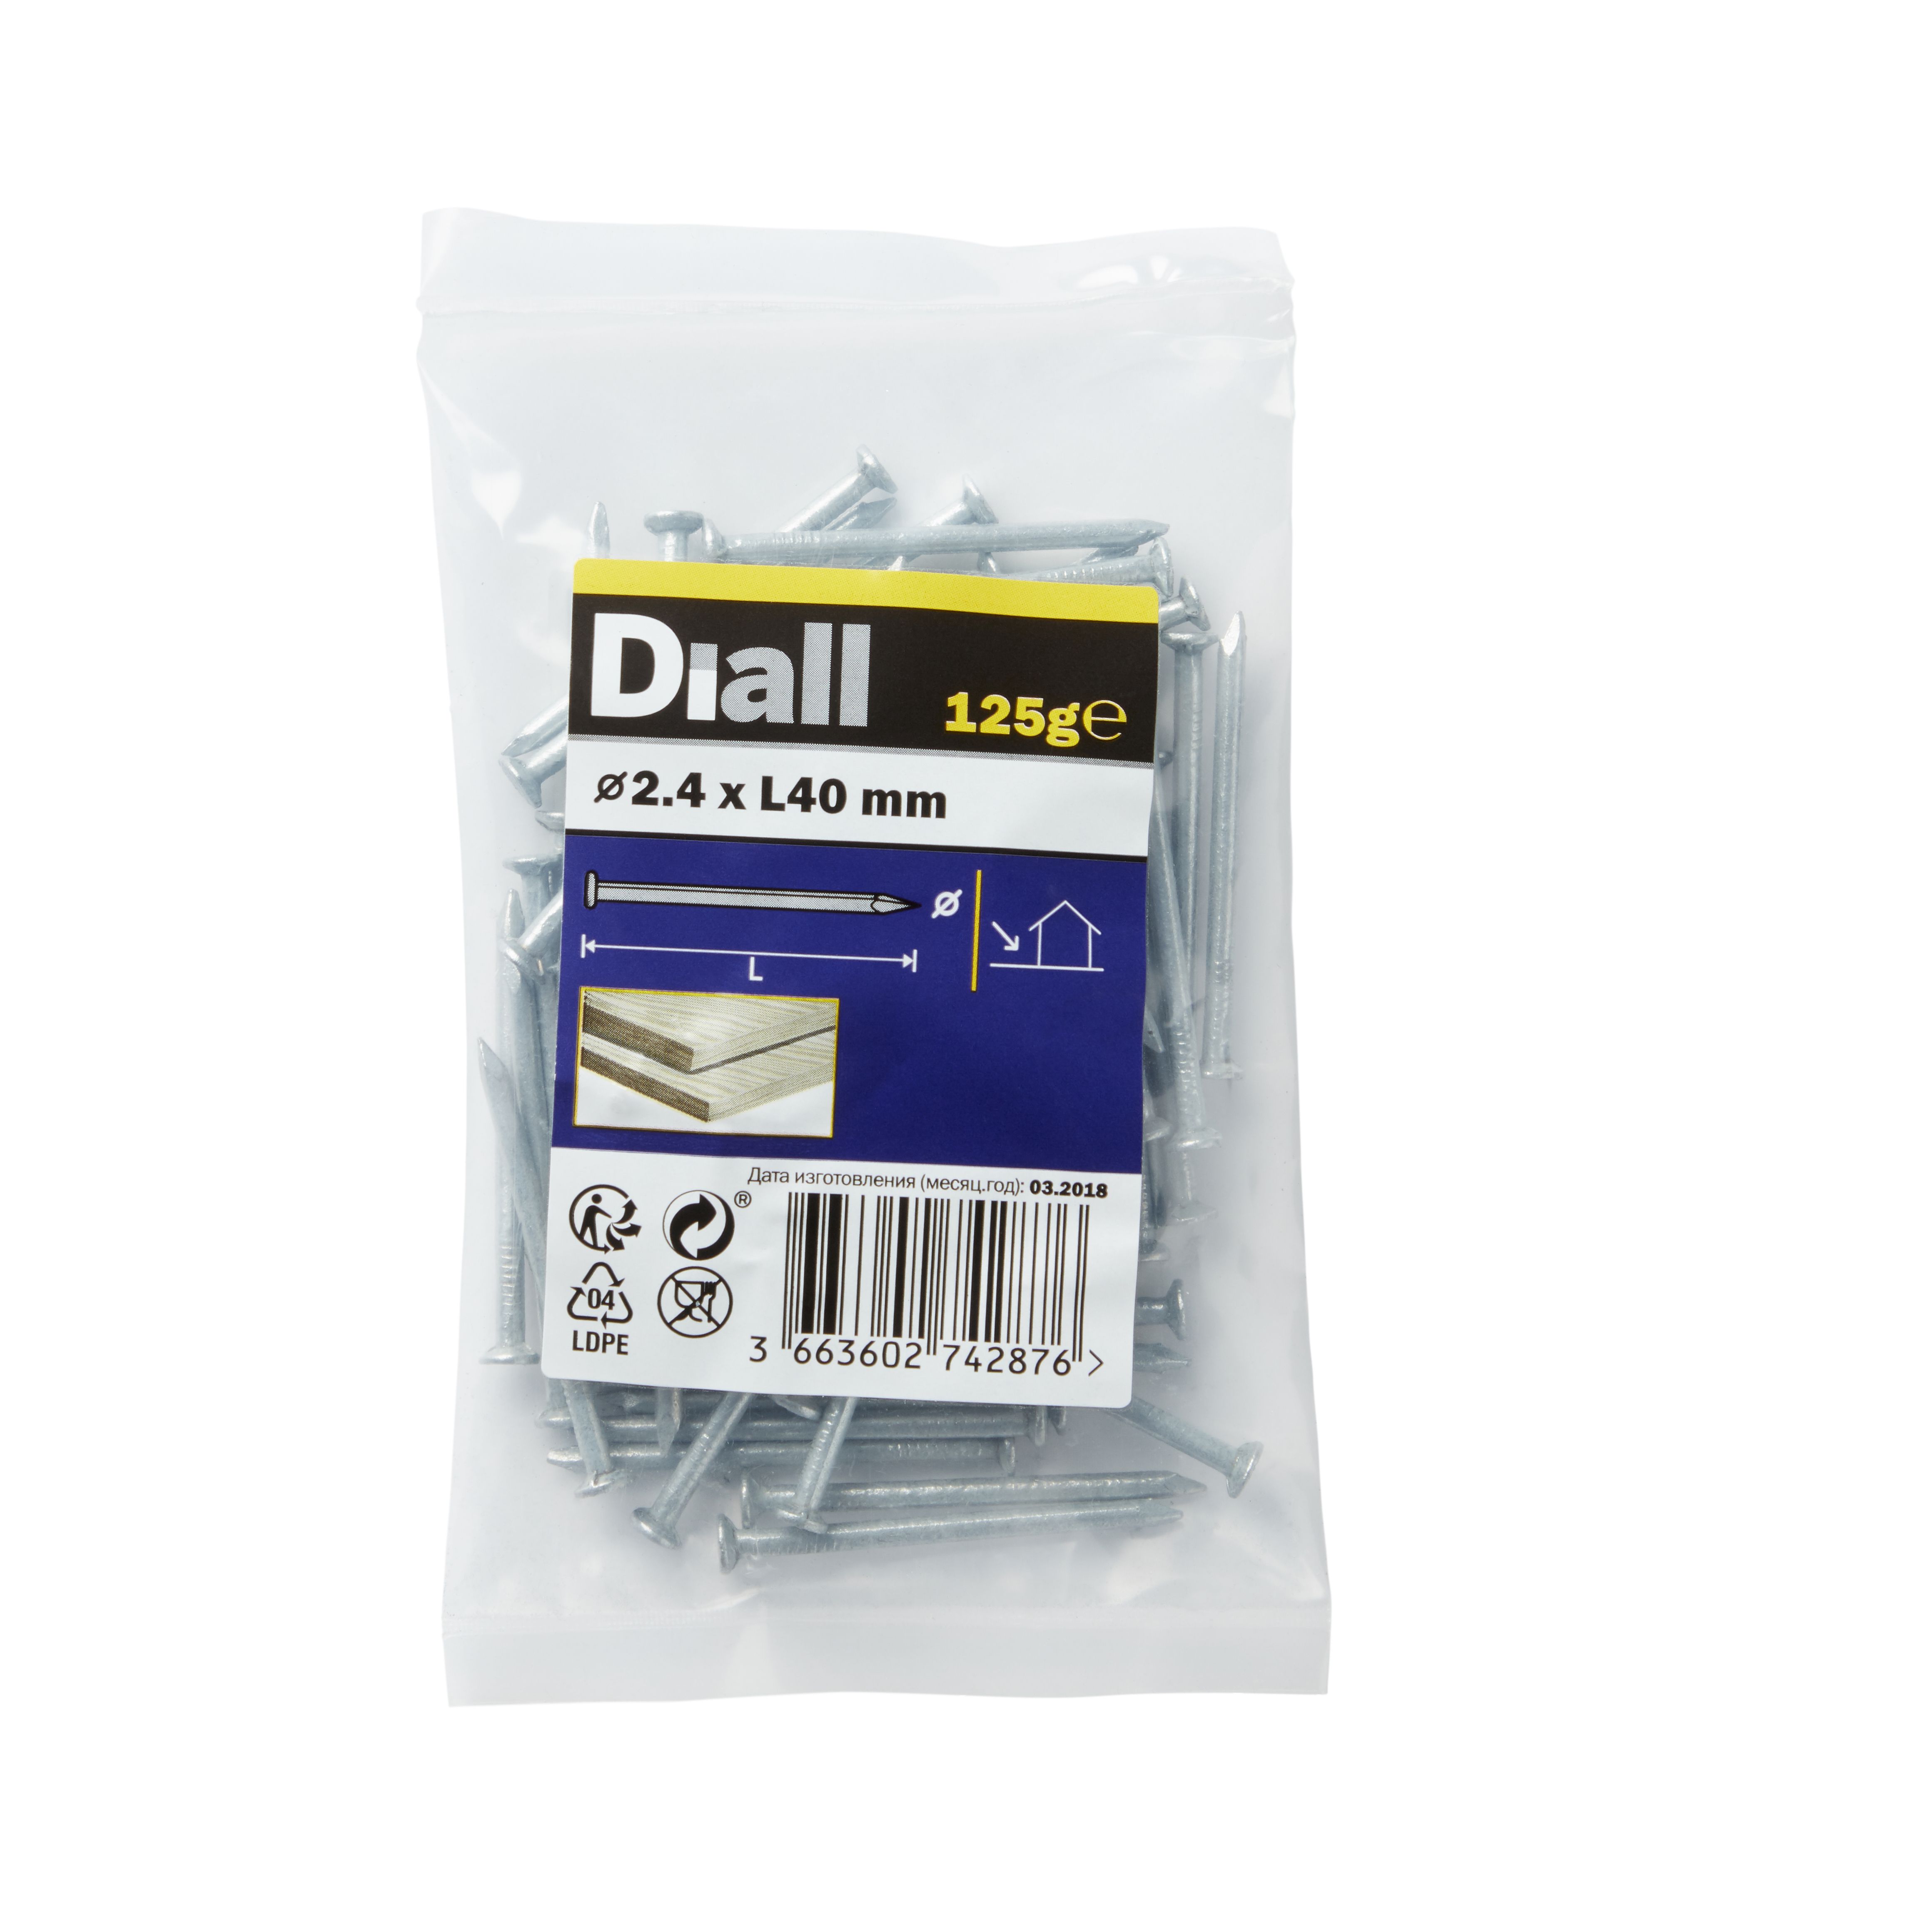 Diall Galvanised Round wire nail (L)40mm (Dia)2.4mm 125g